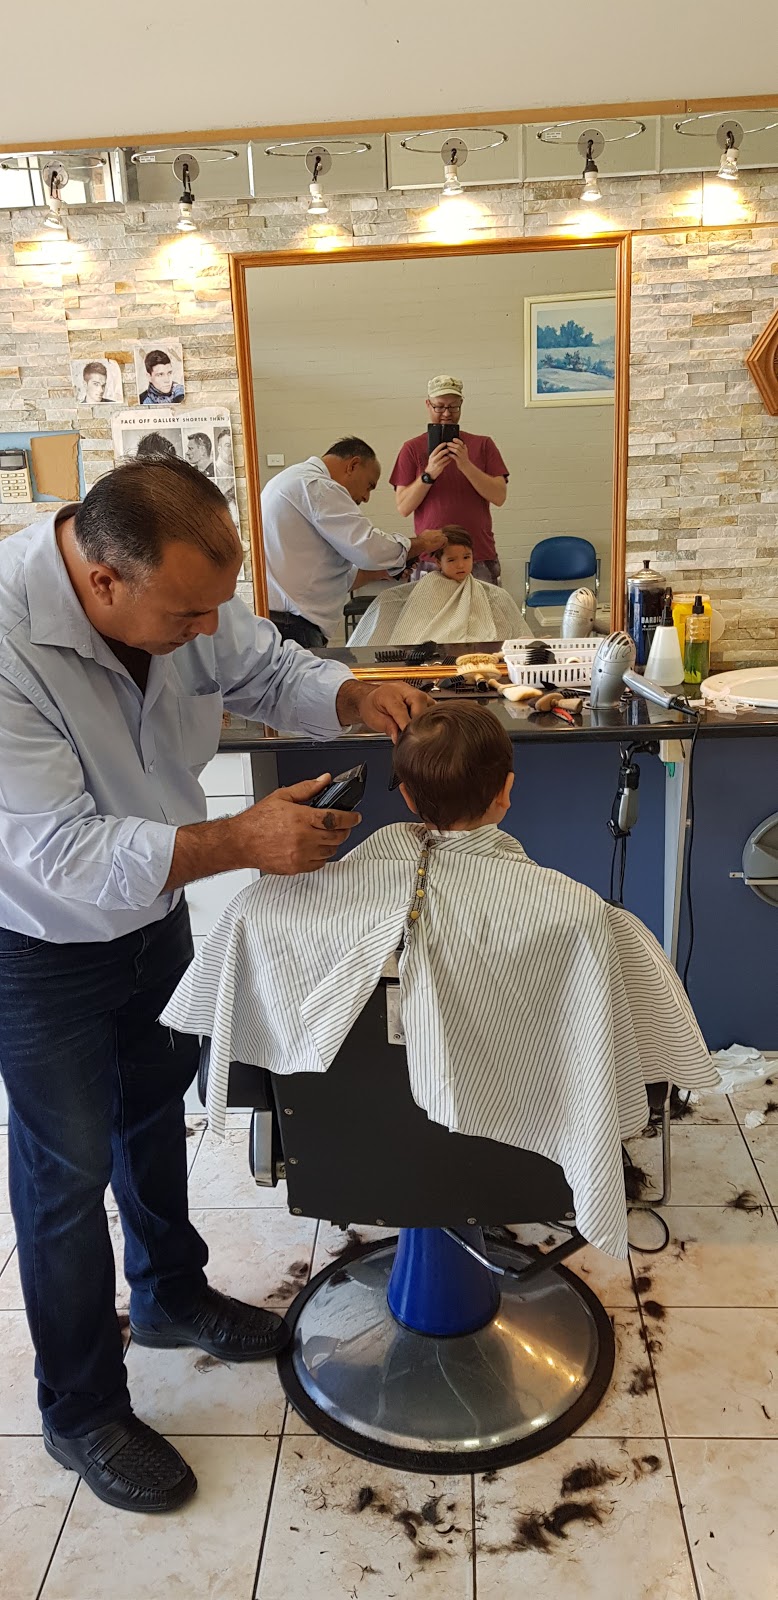 Rooty Hill Barber | 32A Rooty Hill Rd N, Rooty Hill NSW 2766, Australia | Phone: 0402 171 117